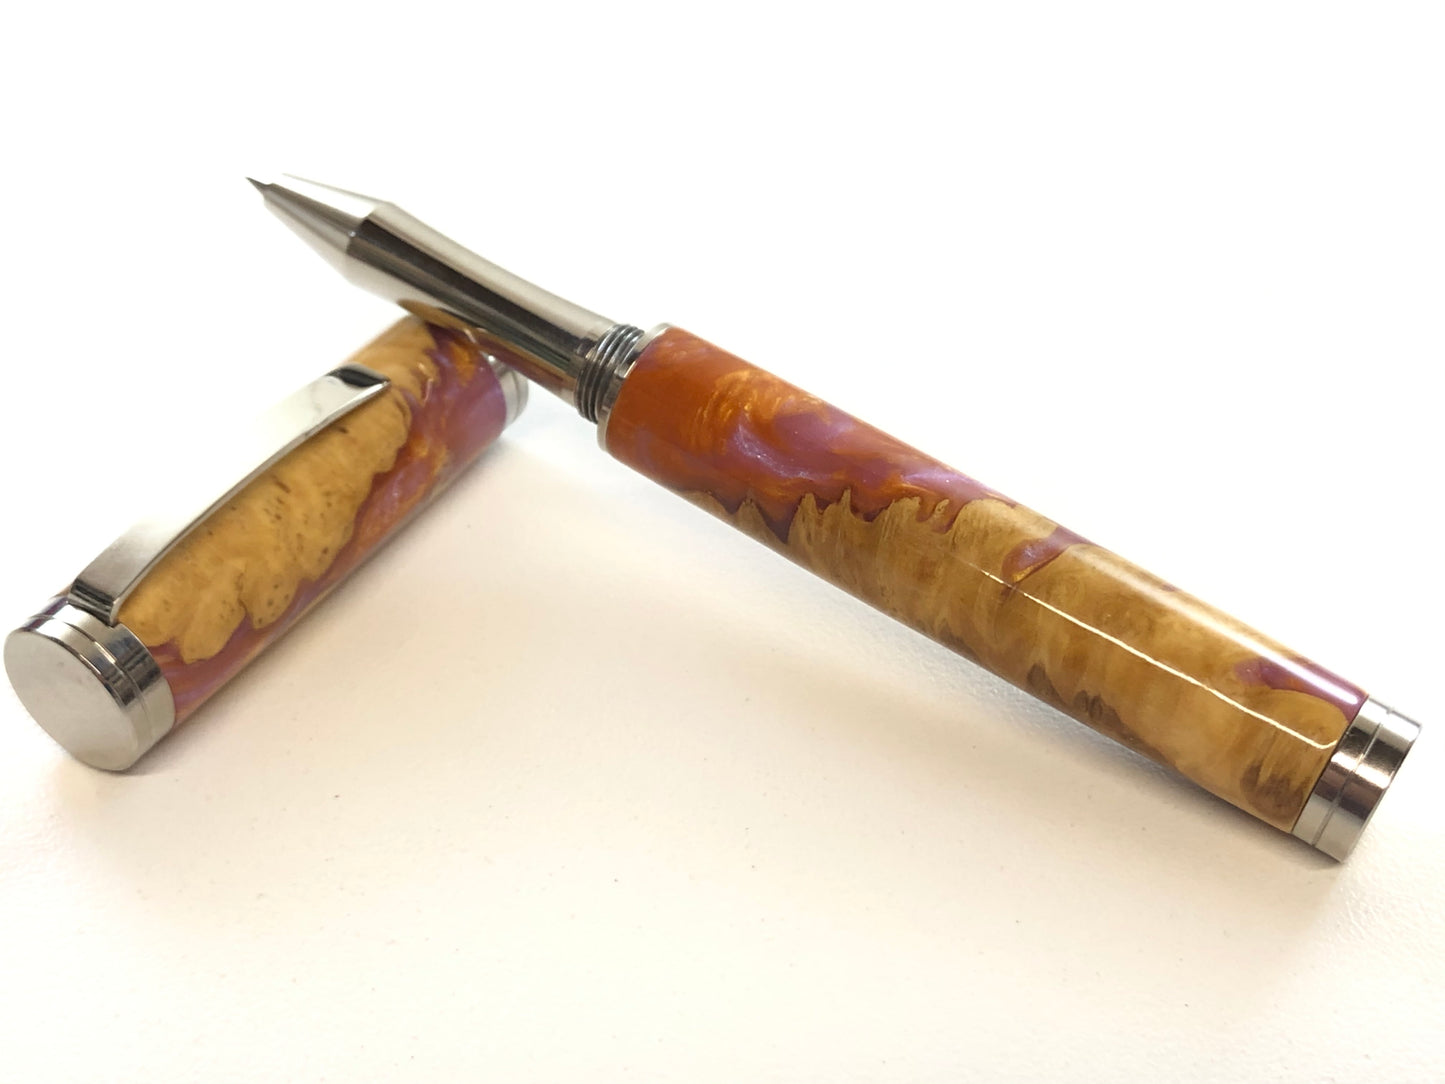 Shakespeare Rollerball / Polished Stainless Steel - Hybrid / Brown Mallee Burl and Gala